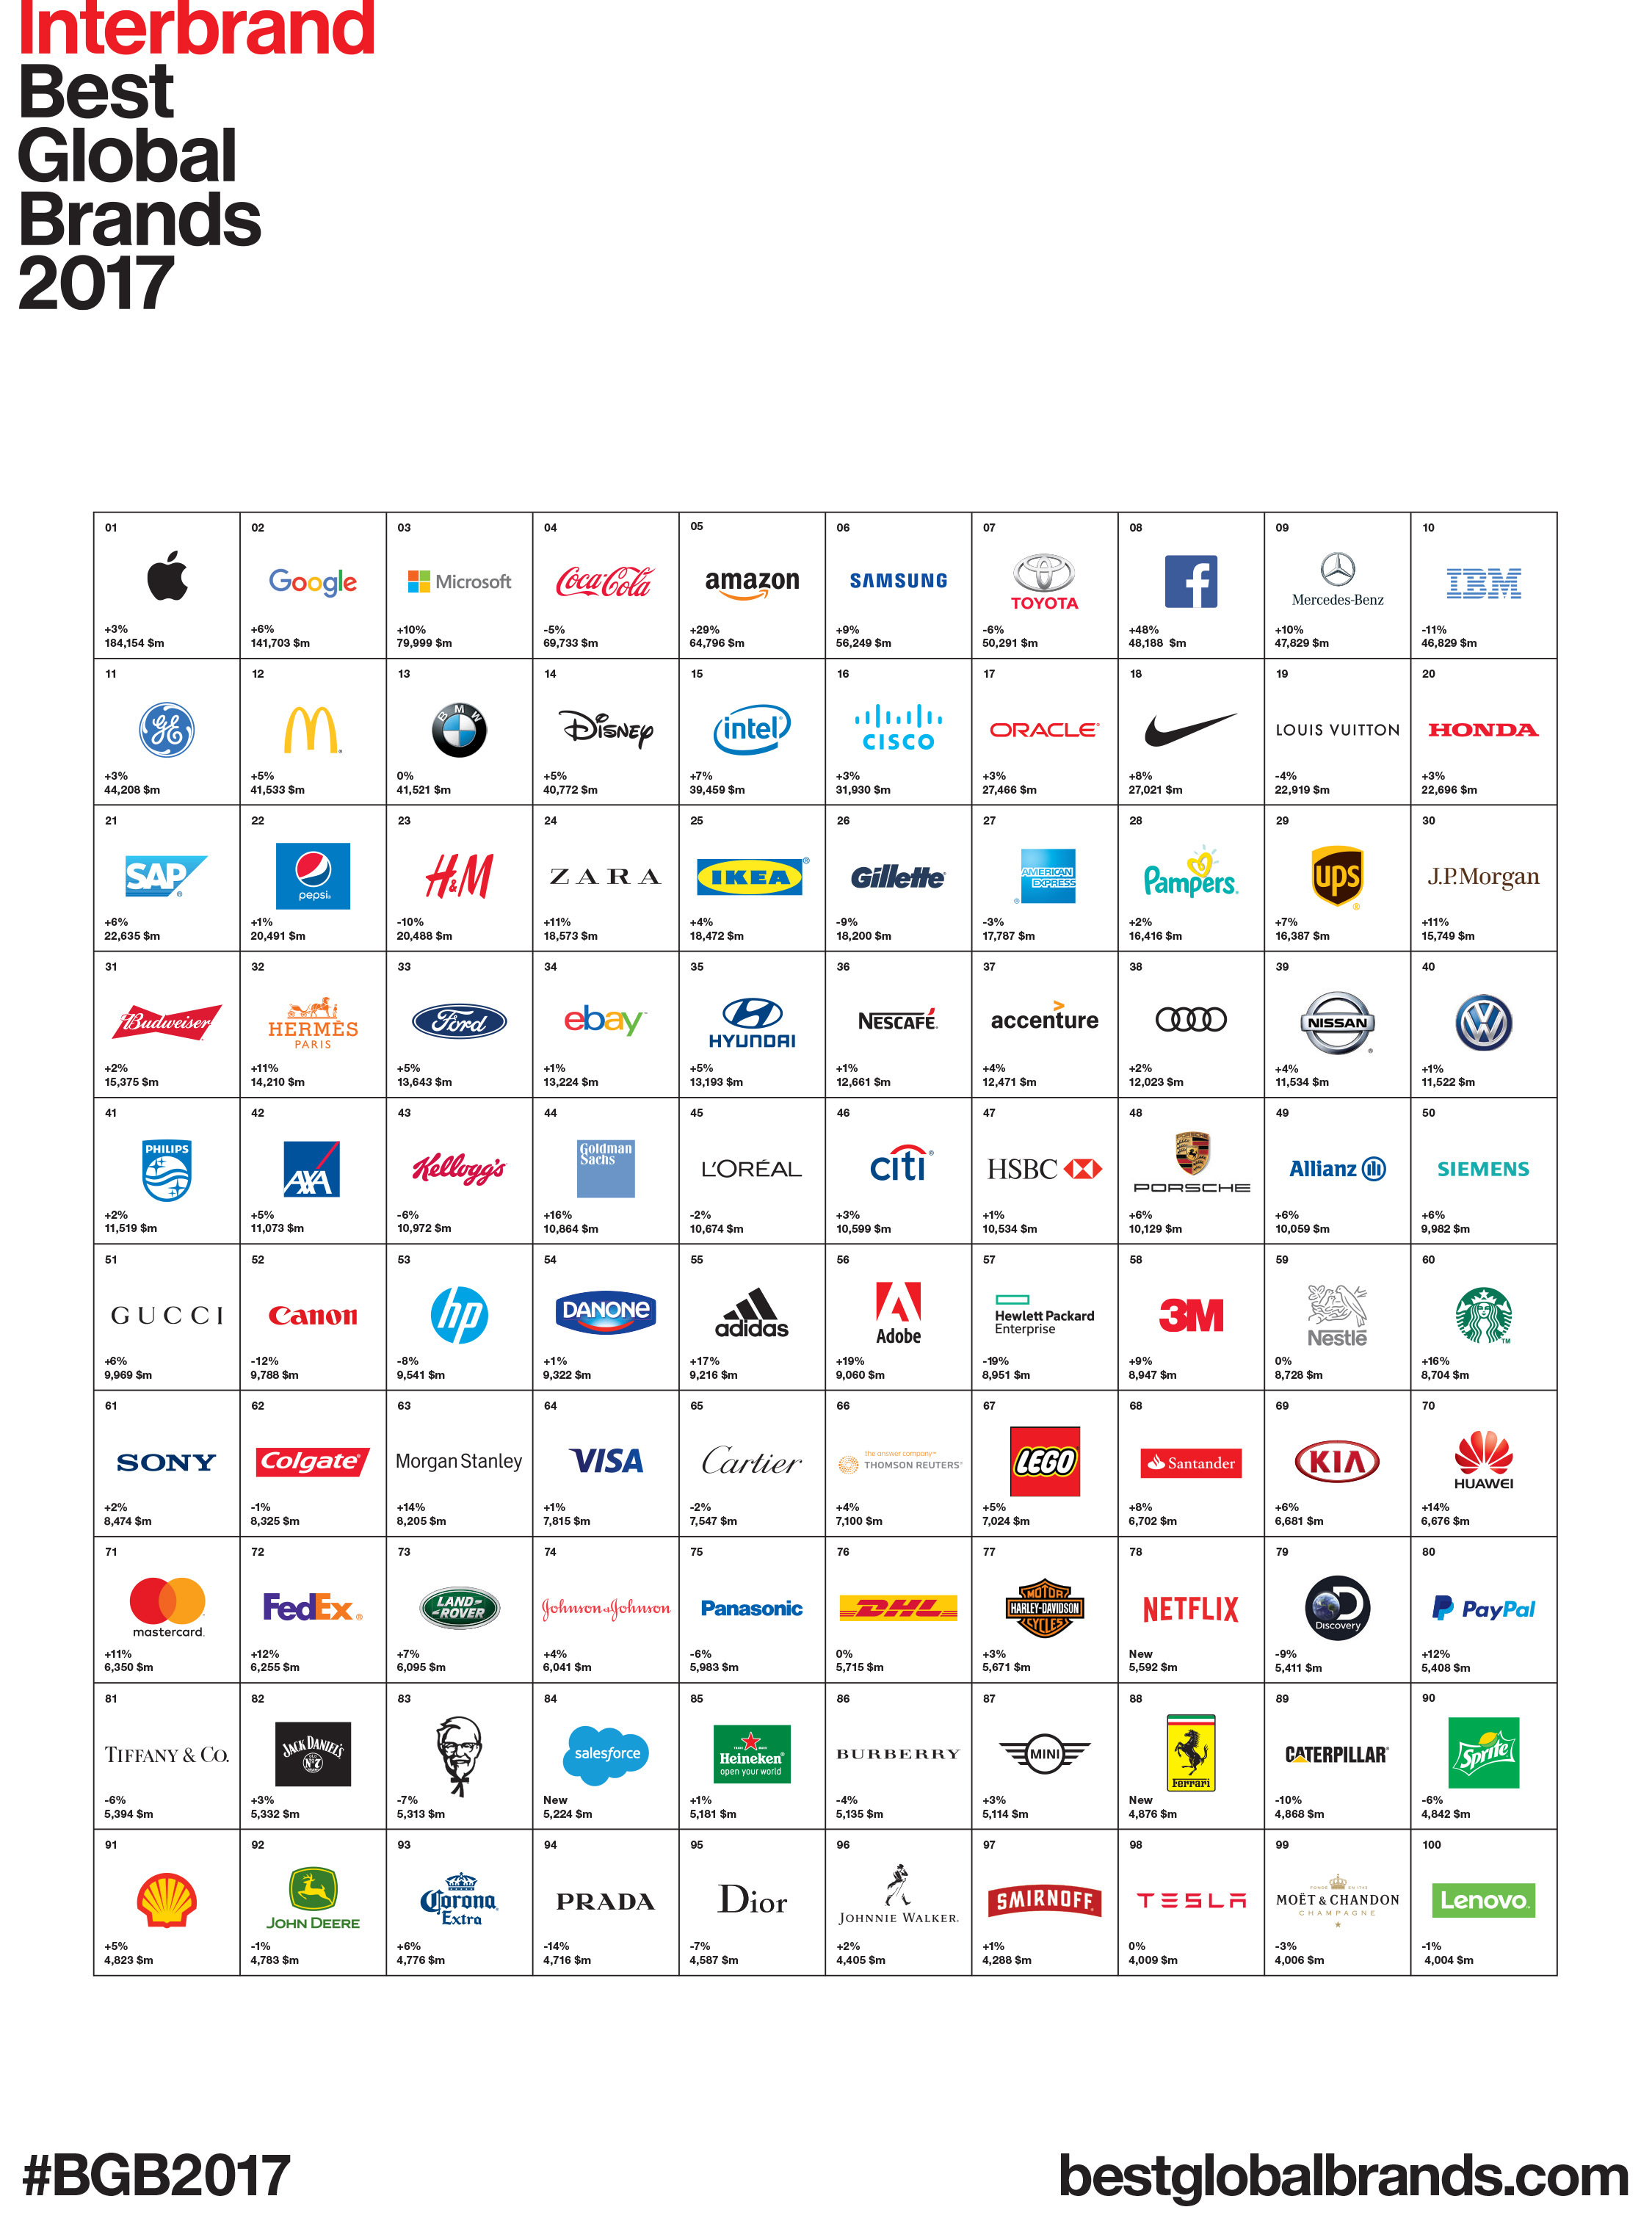 Interbrand Releases 2017 Best Global Brands Report: Apple and Google Hold  the Top Two Spots, while Ferrari, Netflix and Salesforce.com Enter the List